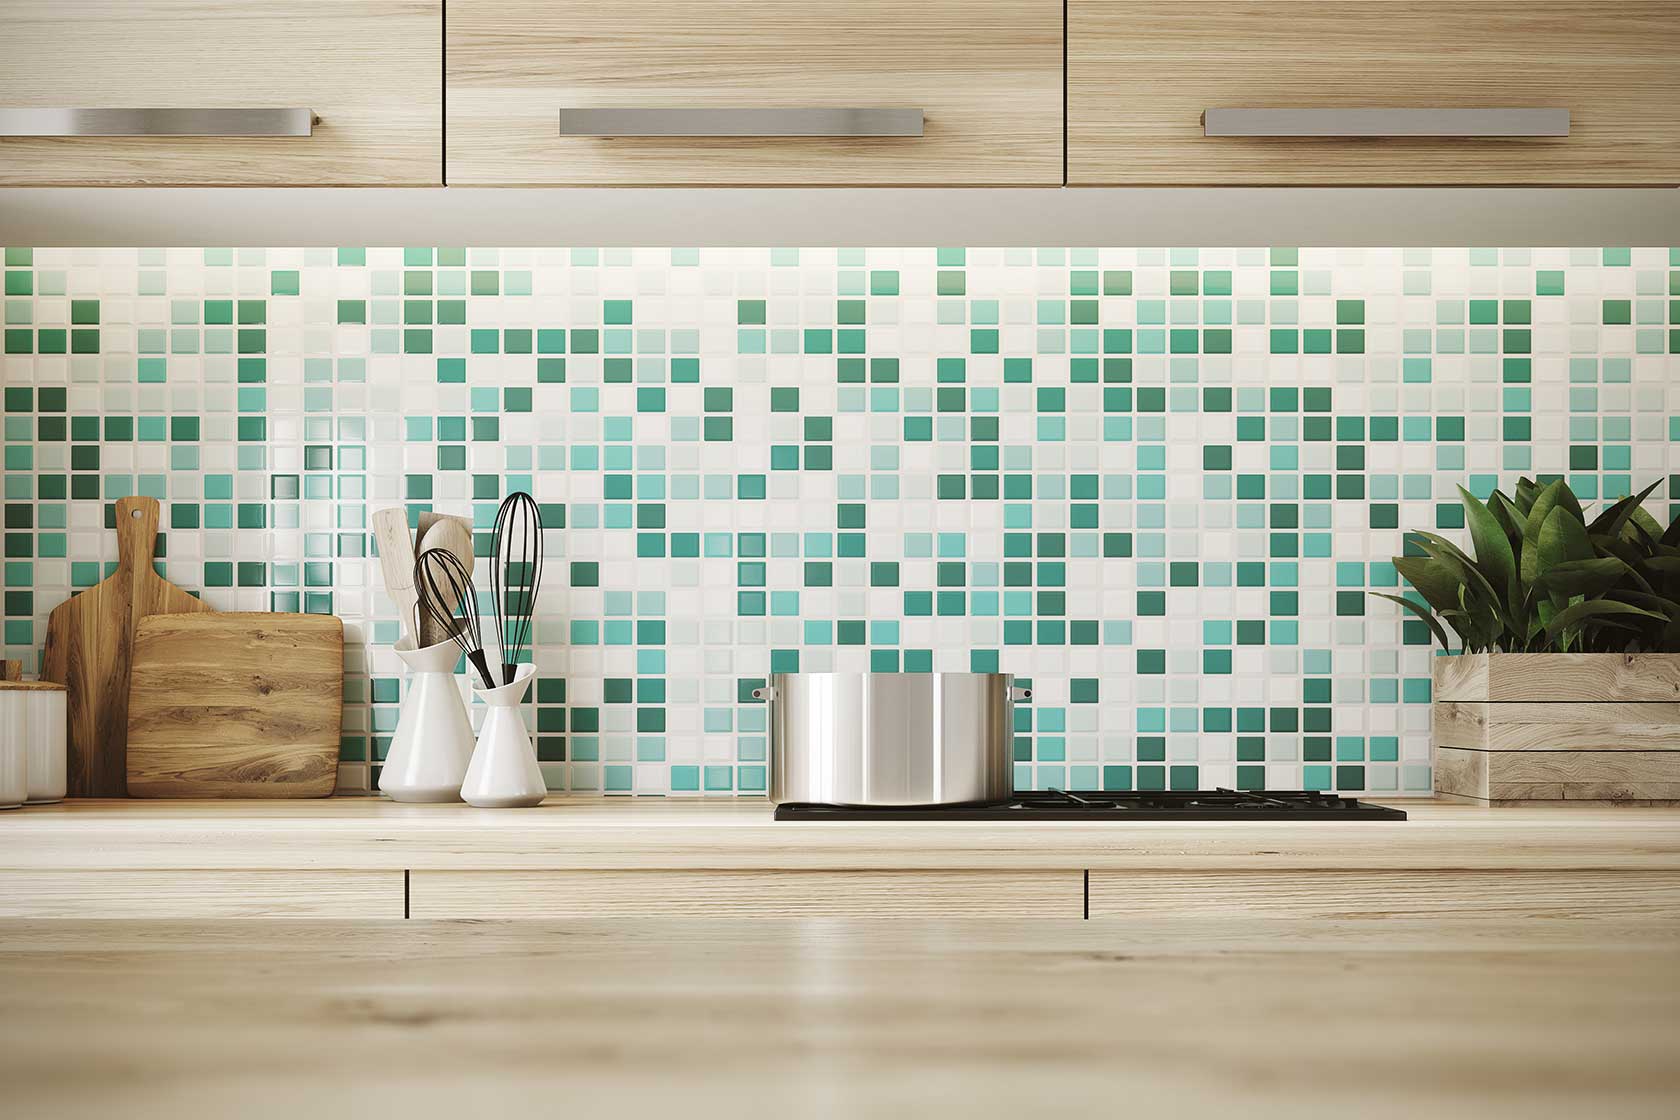 How To Match Your Kitchen Backsplash To Your Countertops